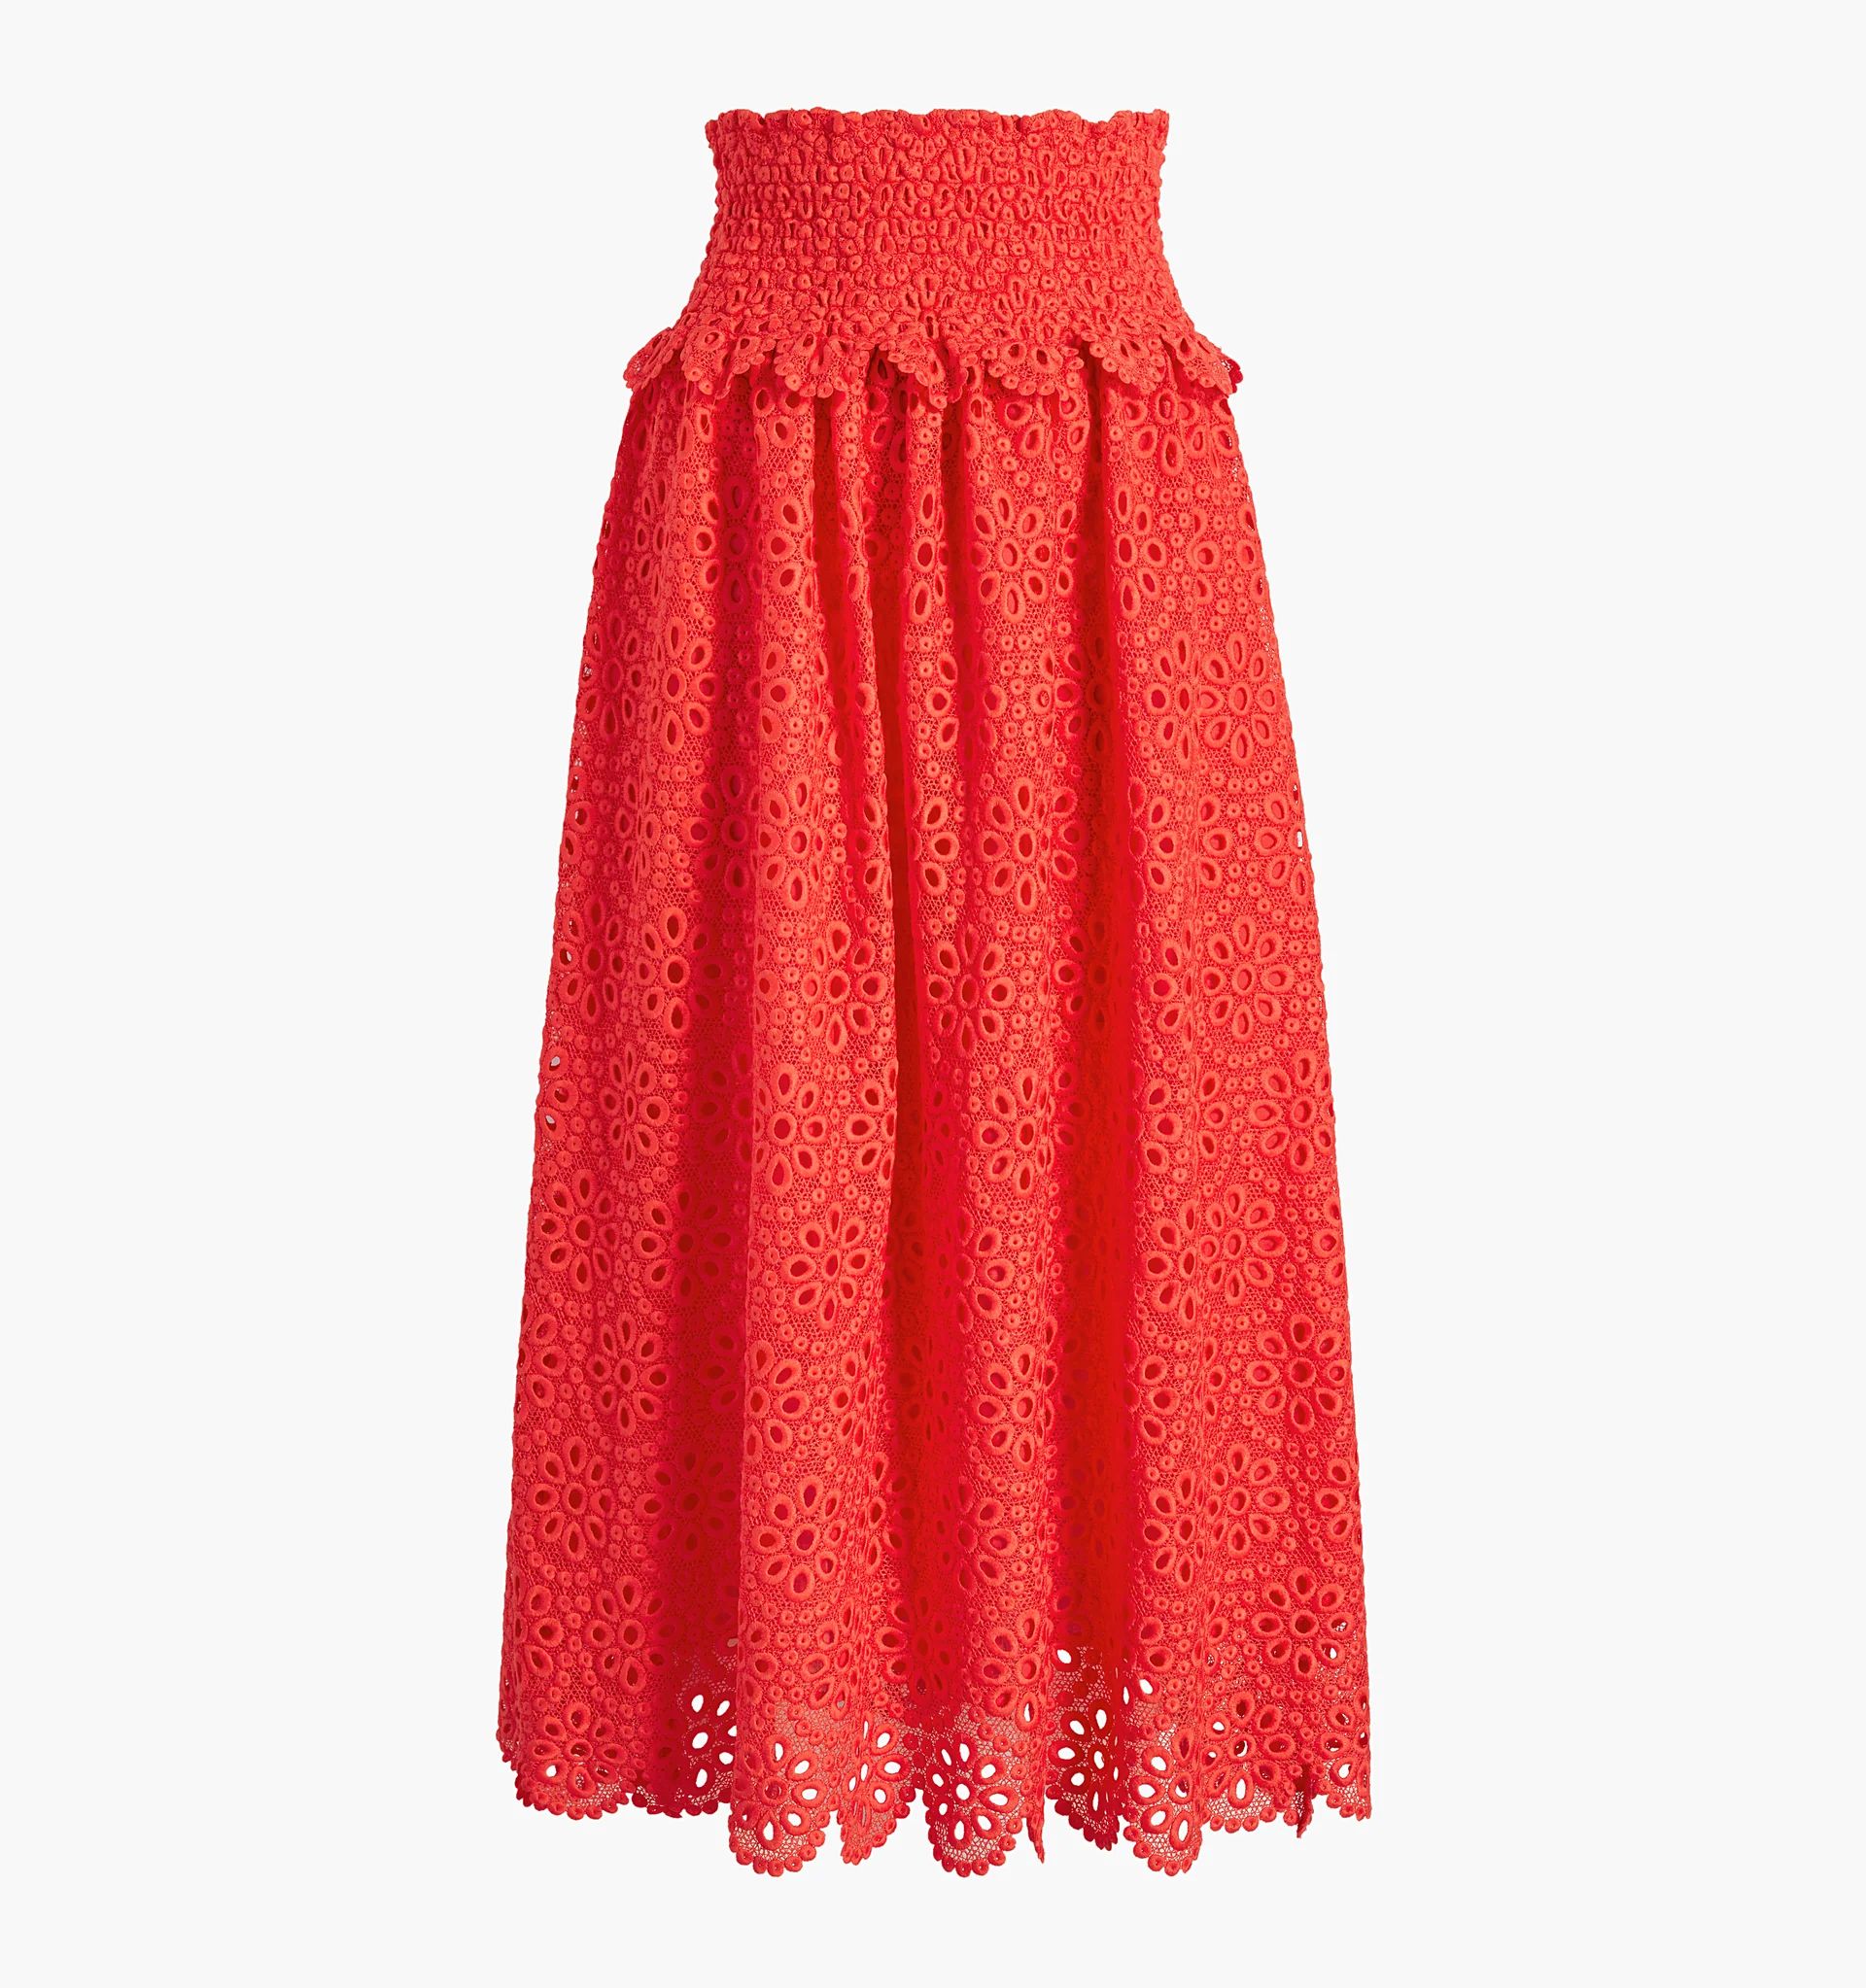 The Scallop Lace Delphine Nap Skirt | Hill House Home